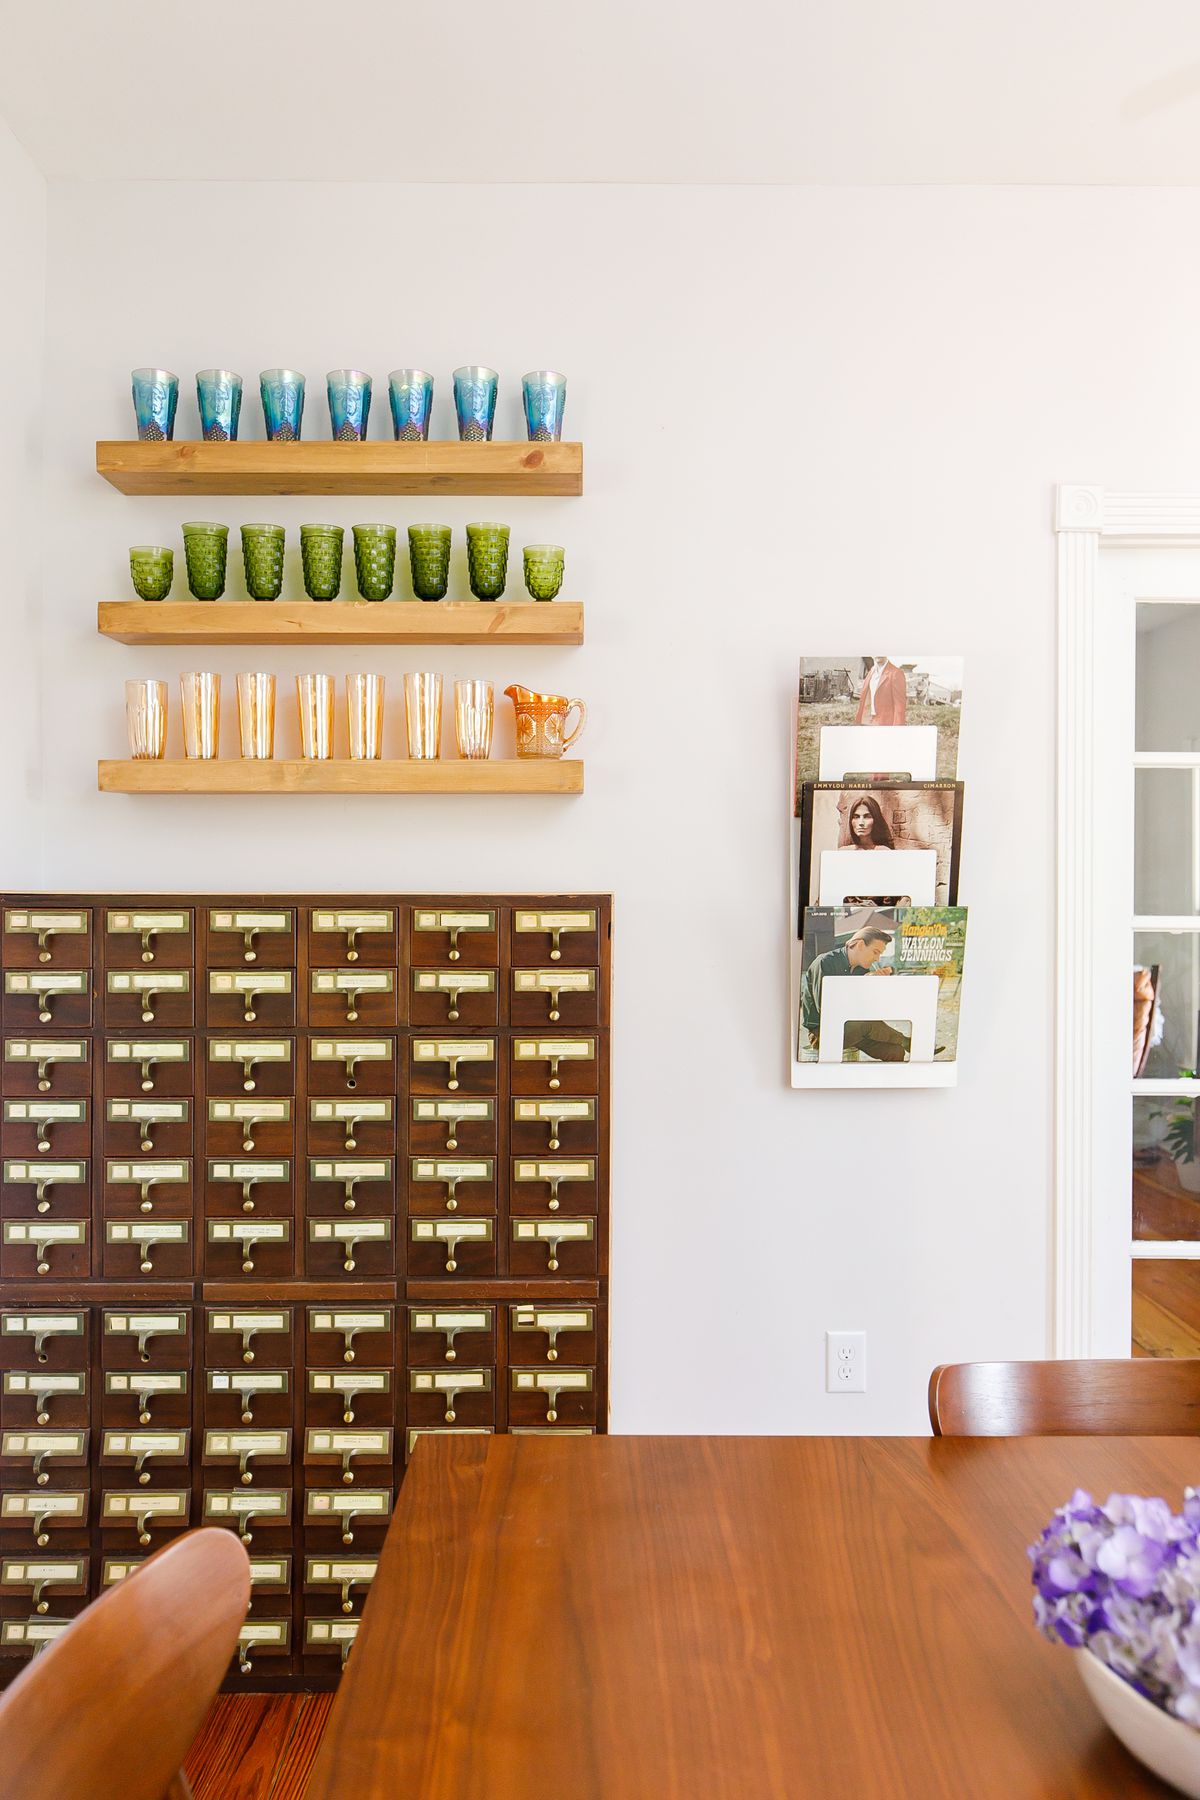 A card catalog sits against a white wall with shelves that hold multiple colored drinking glasses and a magazine rack full of magazines. There is a table in the foreground.